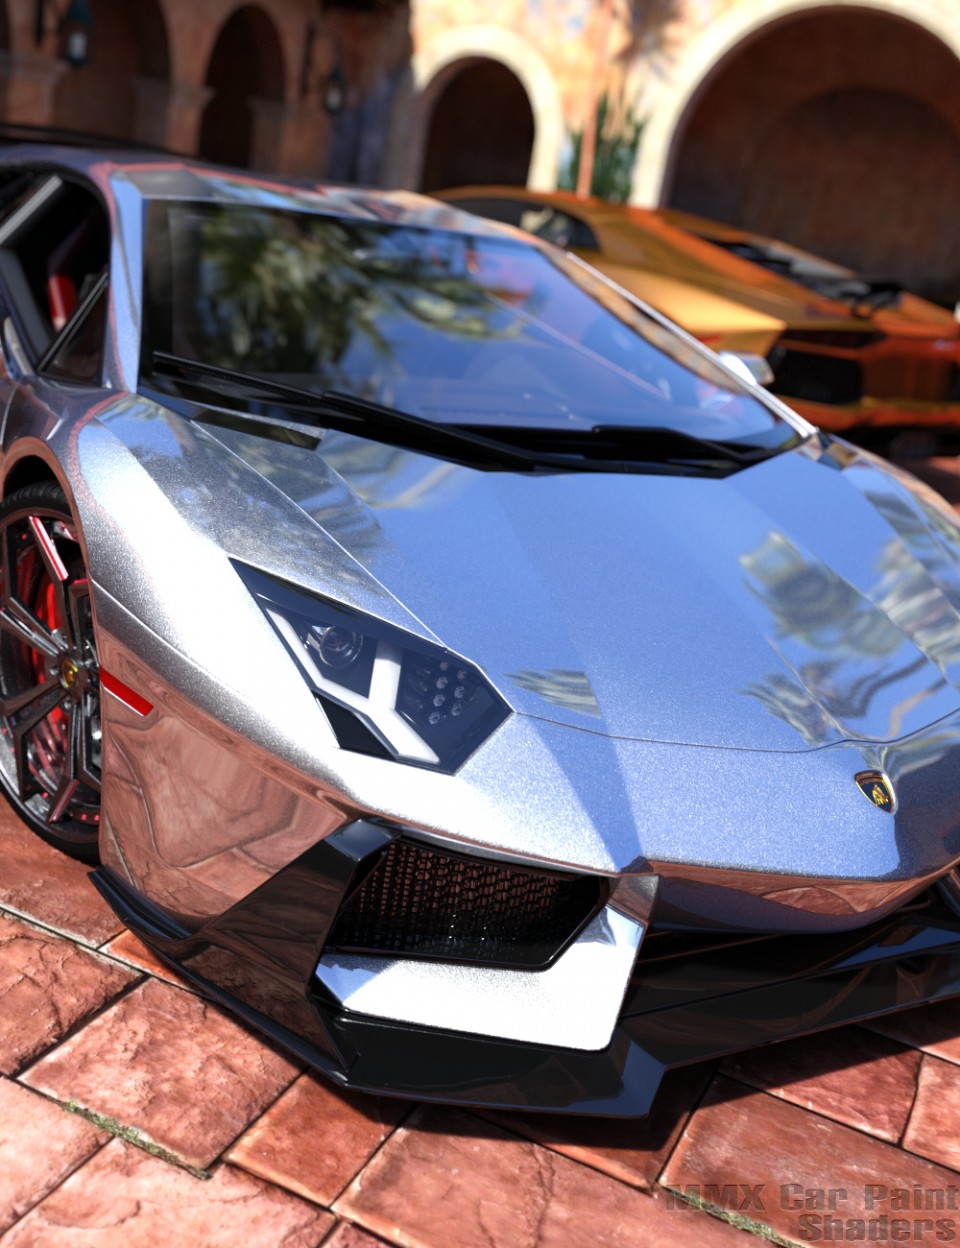 MMX Car Paint Shaders for Iray_DAZ3DDL